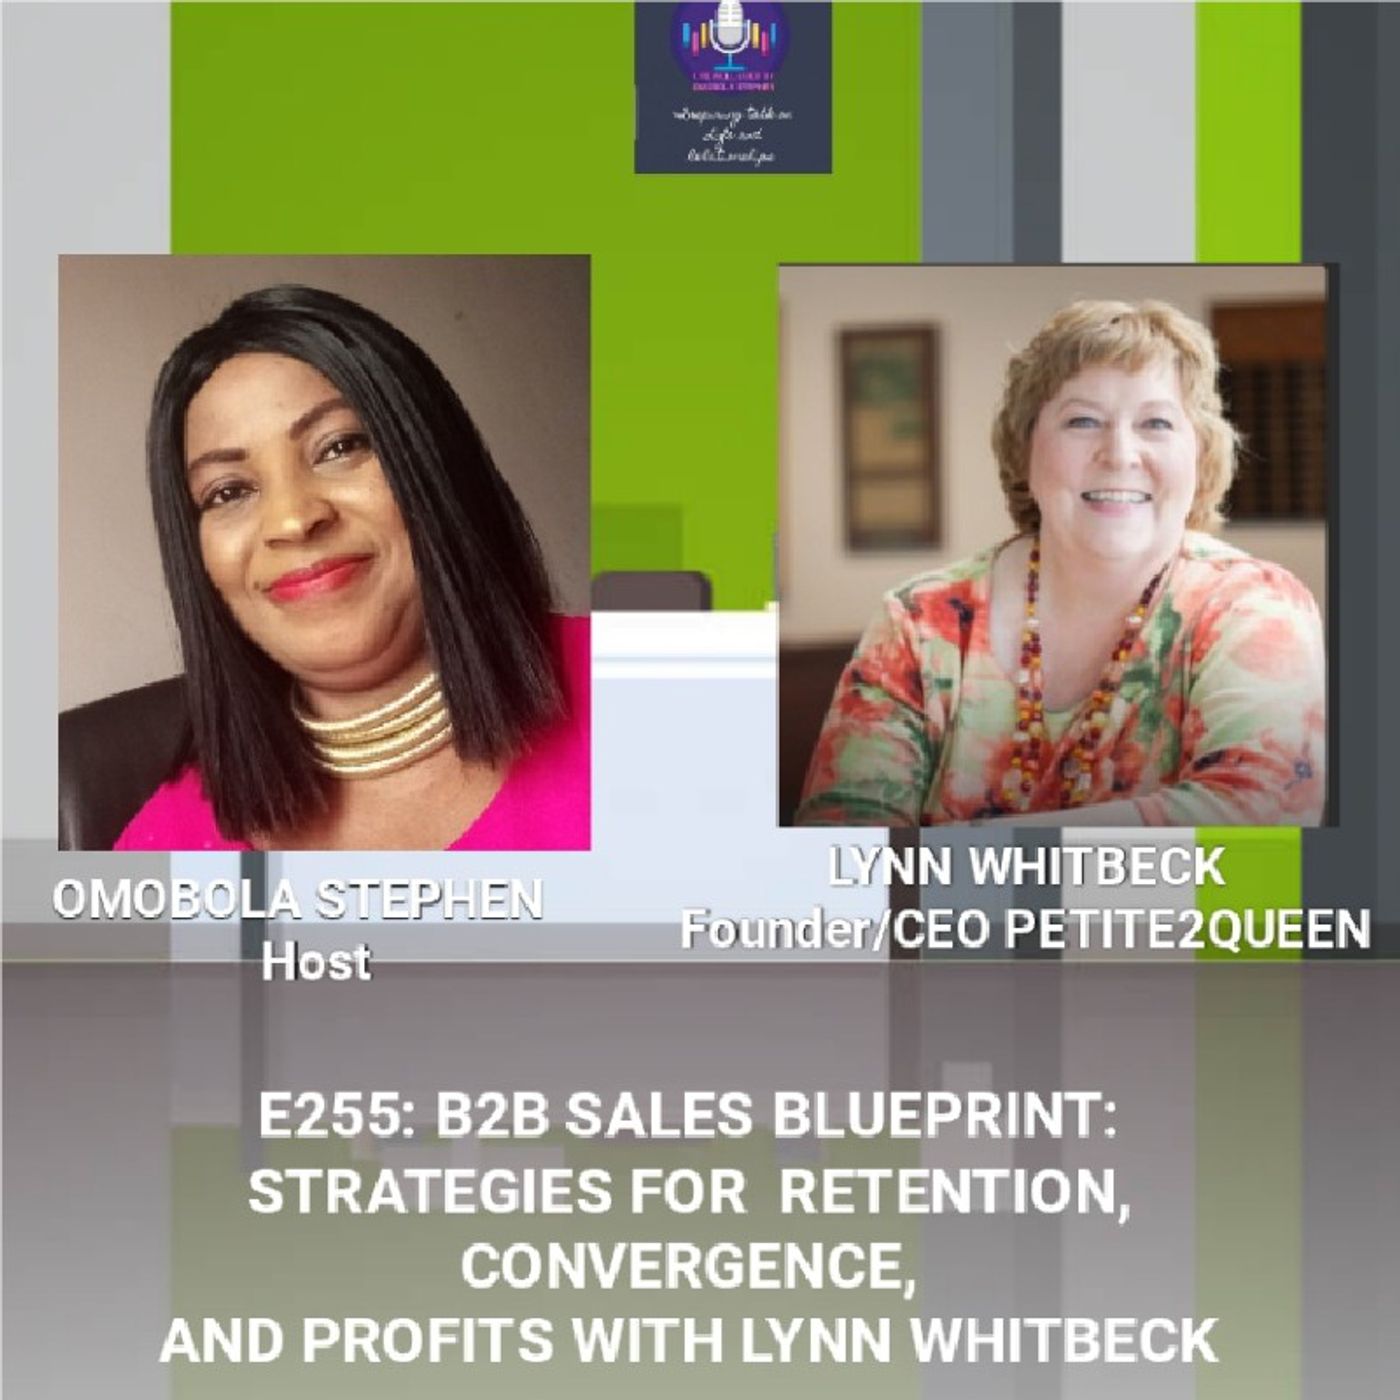 E255:B2B Sales Blueprint: Strategies For Retention, Convergence, And Profits With Lynn Whitbeck